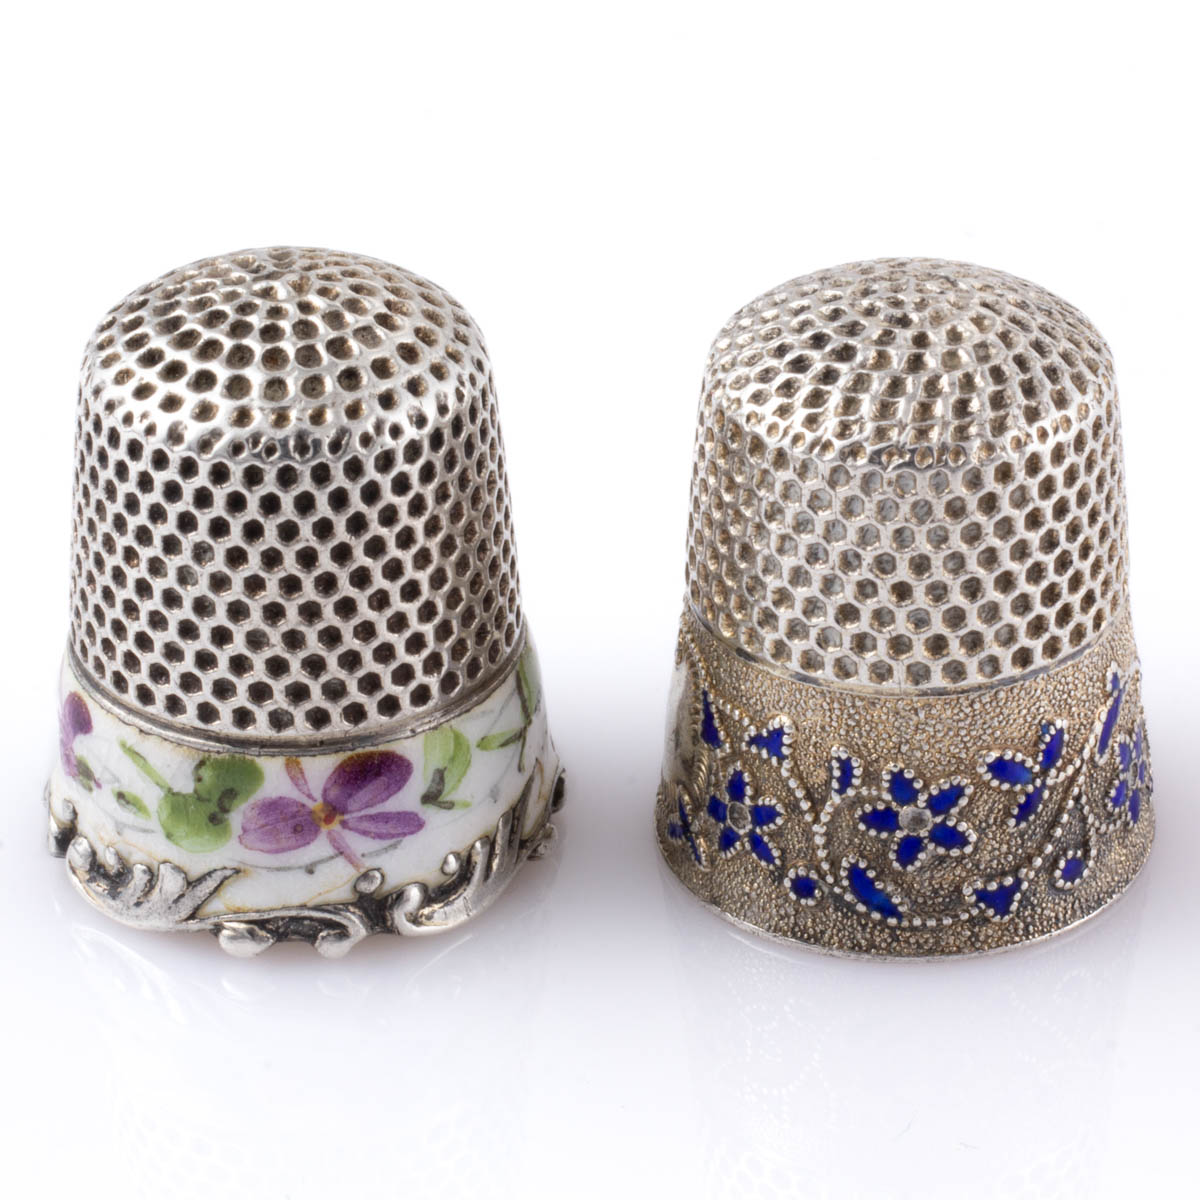 KETCHAM & MCDOUGALL (KMD) STERLING SILVER SEWING THIMBLES, LOT OF TWO